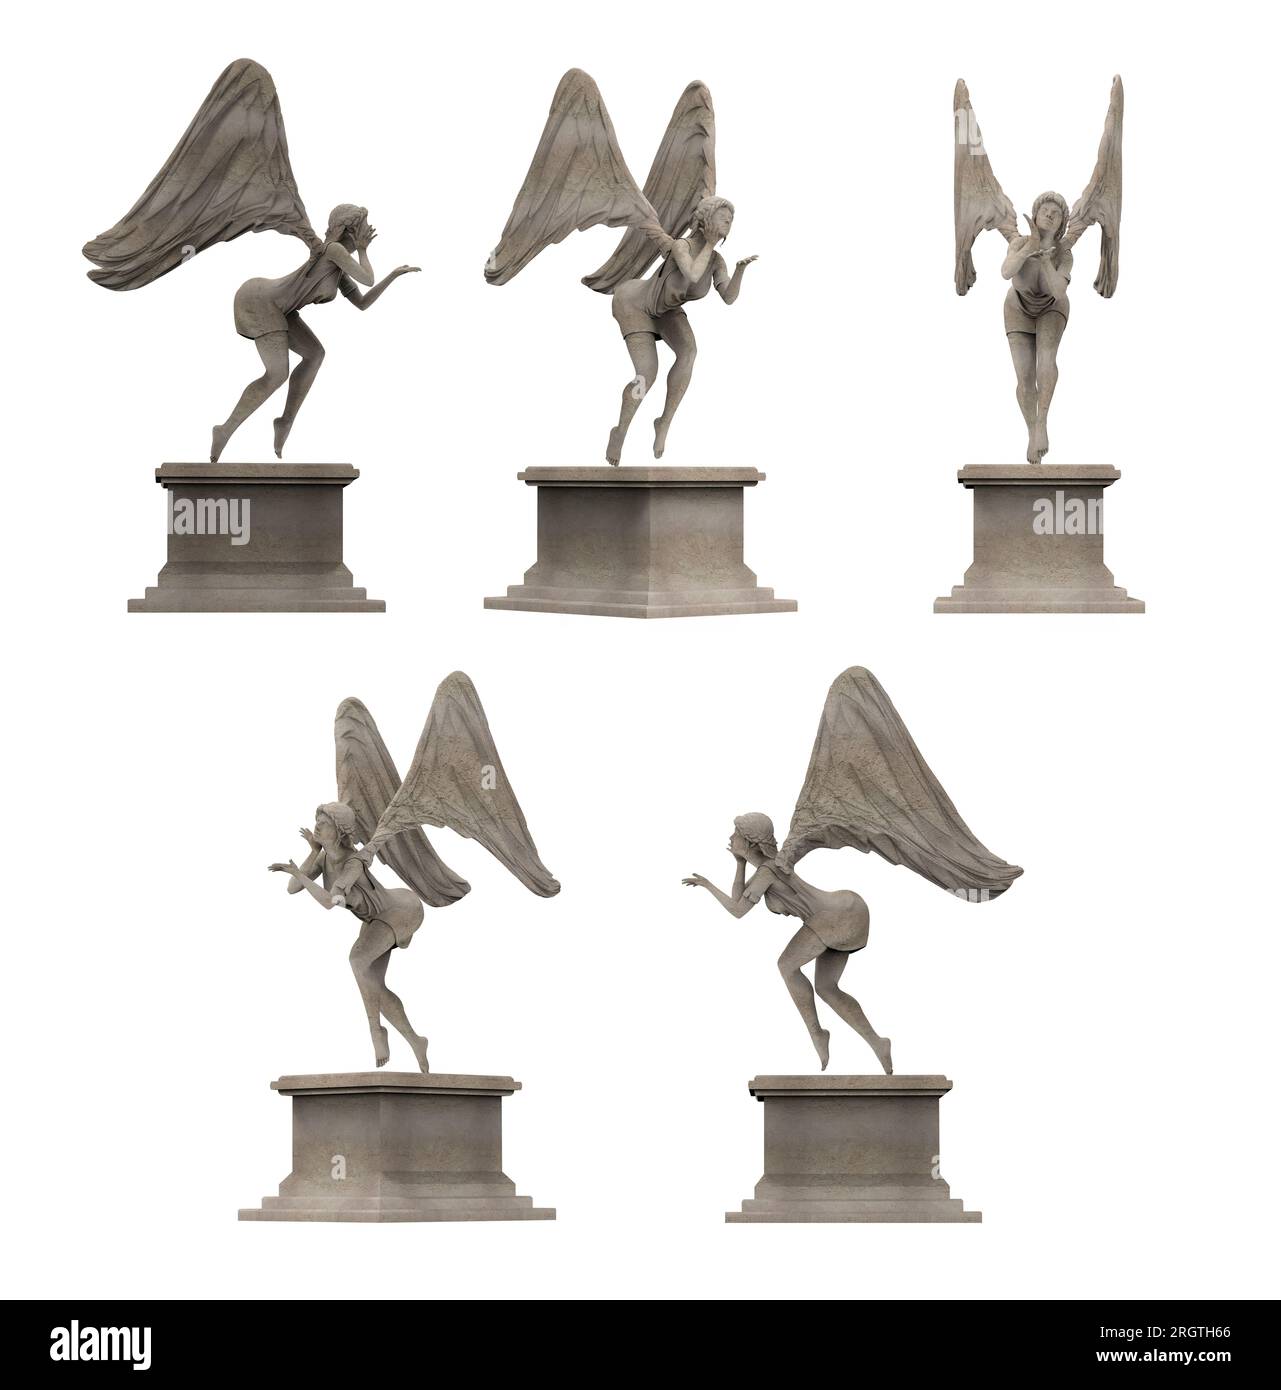 Isolated 3d render illustration of flying female stone angel statue on pedestal., various angles. Stock Photo